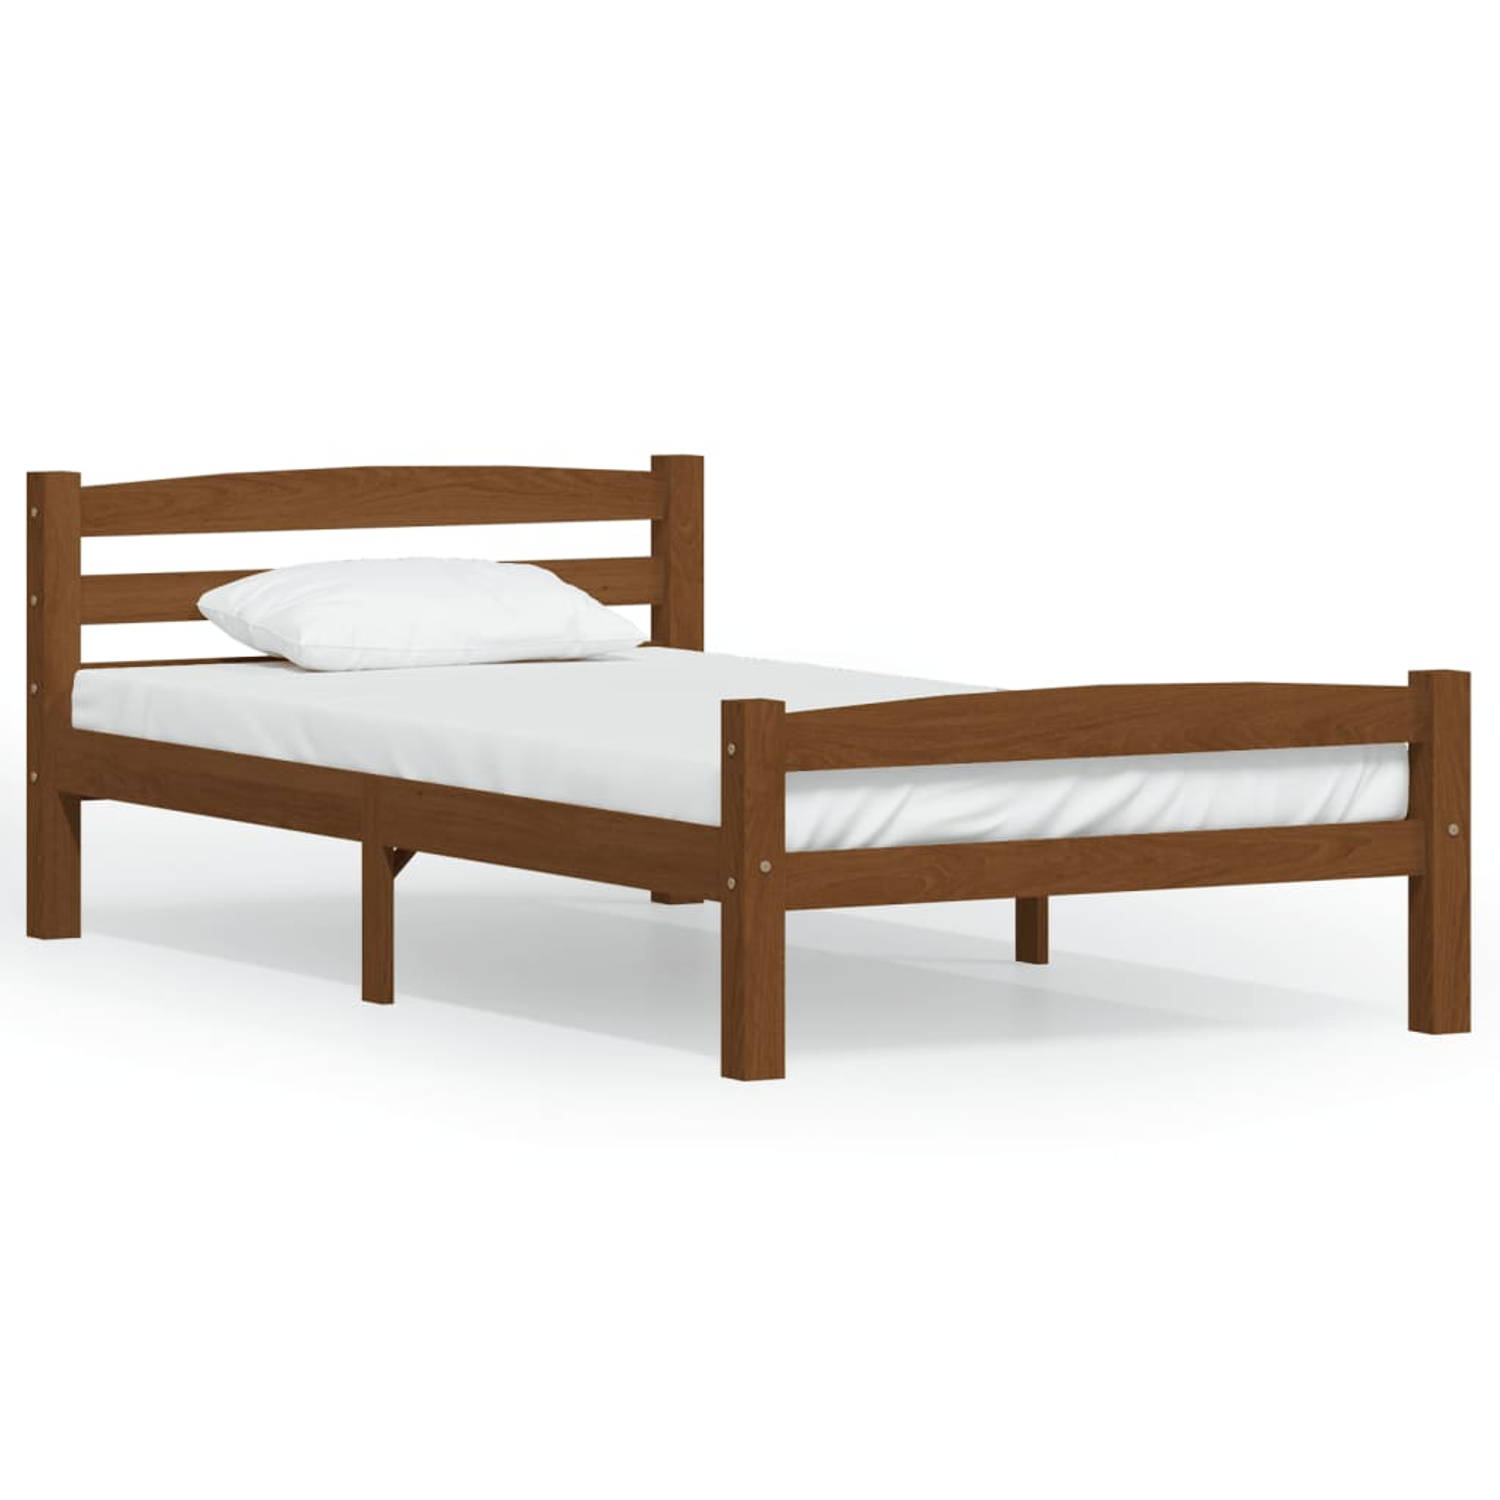 The Living Store Bedframe massief grenenhout honingbruin 100x200 cm - Bedframe - Bedframe - Bed Frame - Bed Frames - Bed - Bedden - 1-persoonsbed - 1-persoonsbedden - Eenpersoons B